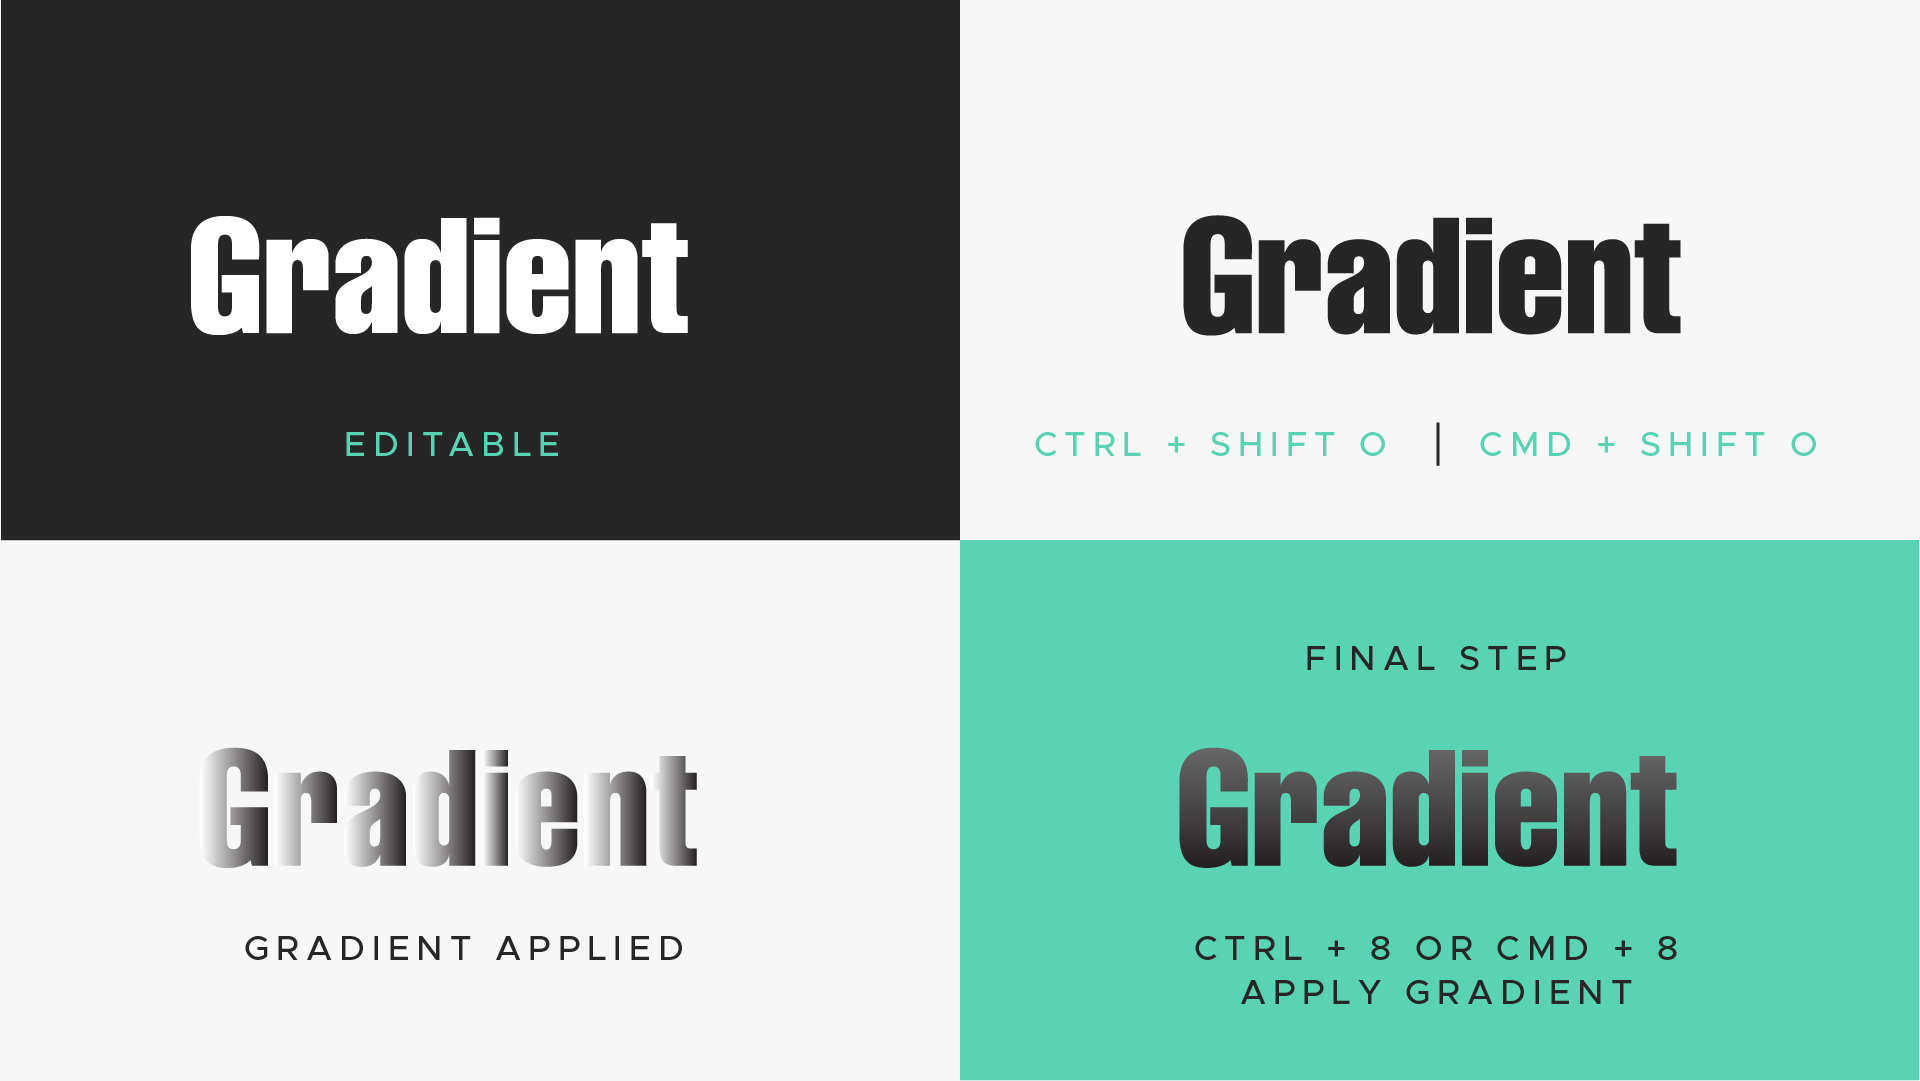 add gradients to text non-destructively